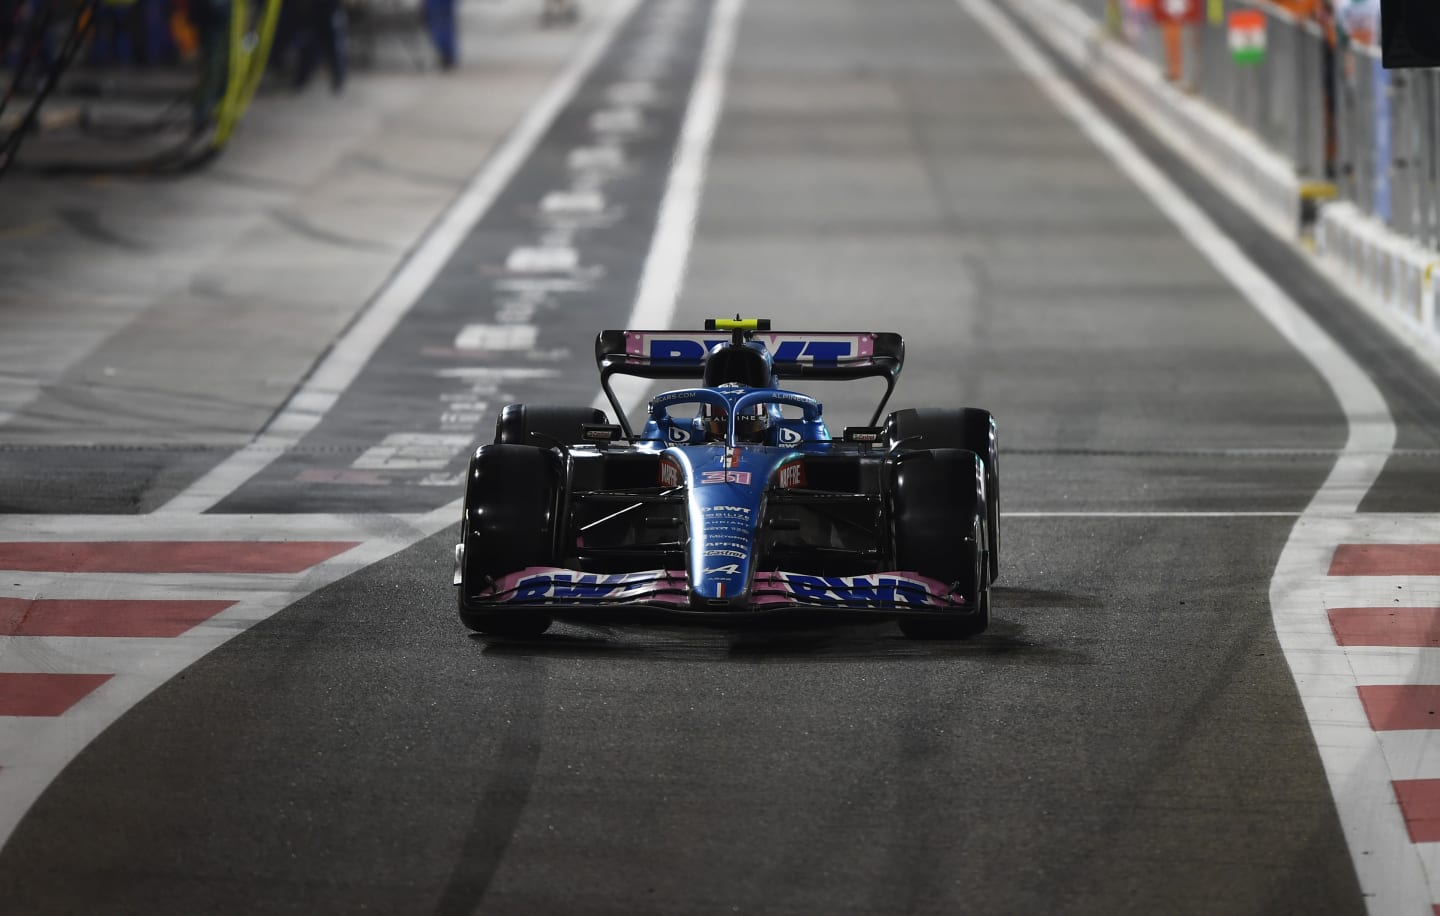 ABU DHABI, UNITED ARAB EMIRATES - NOVEMBER 20: Esteban Ocon of France driving the (31) Alpine F1 A522 Renault in the pitlane during the F1 Grand Prix of Abu Dhabi at Yas Marina Circuit on November 20, 2022 in Abu Dhabi, United Arab Emirates. (Photo by Rudy Carezzevoli/Getty Images)